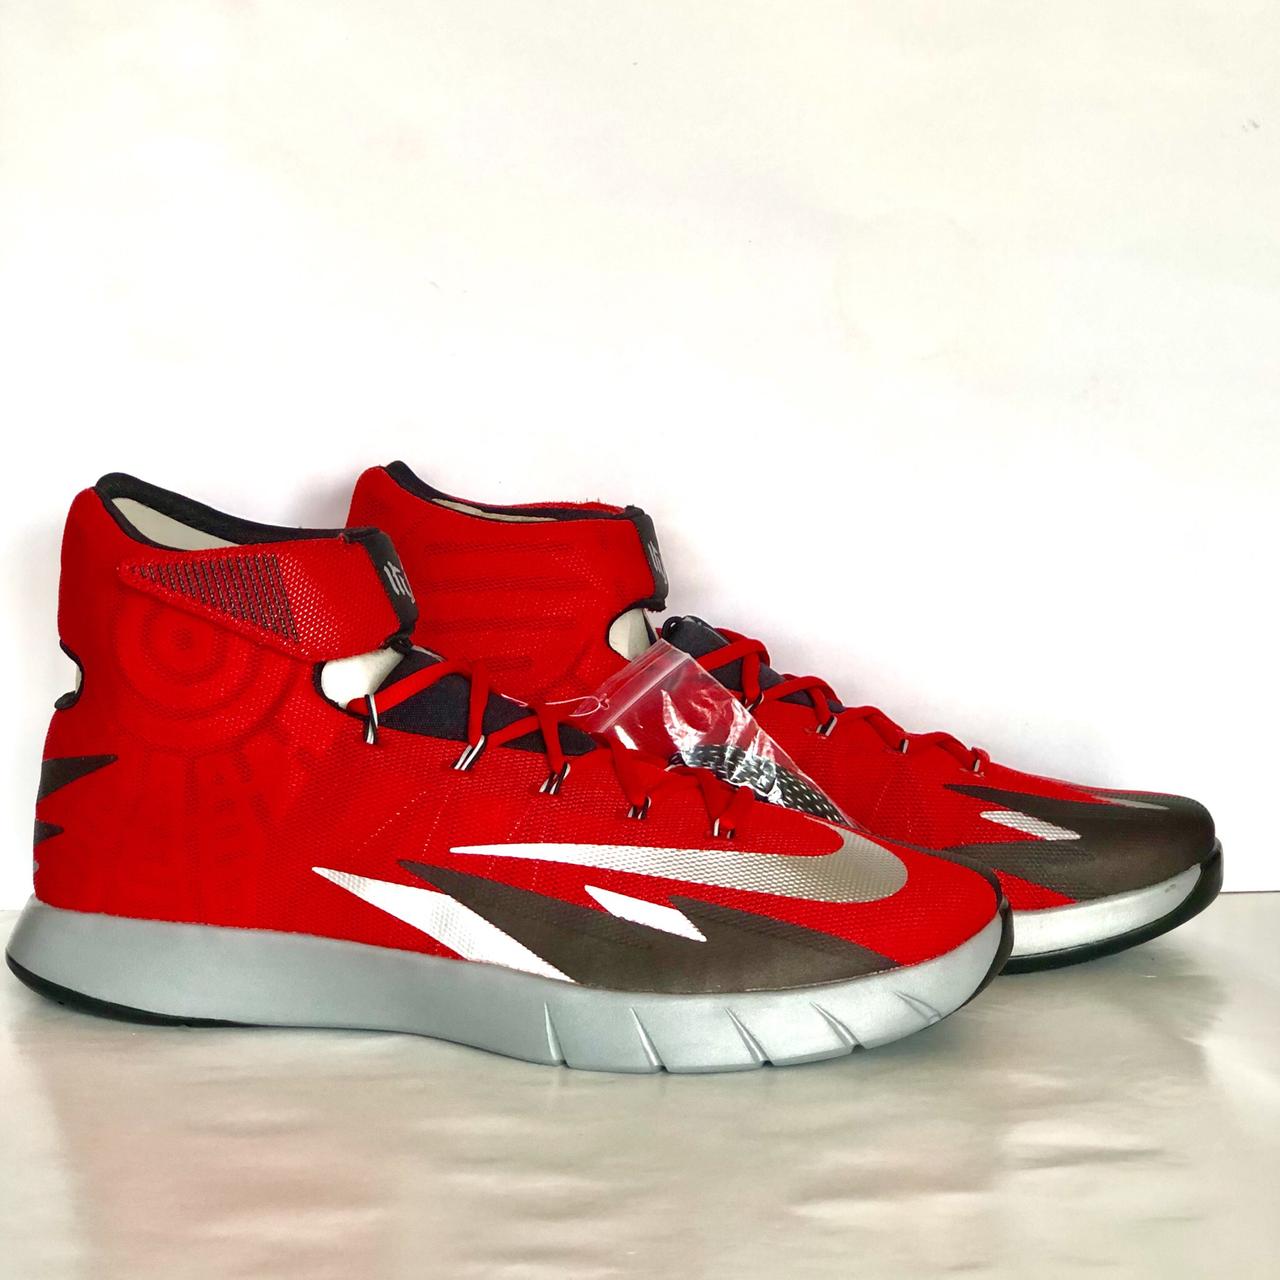 Nike Zoom Hyperrev Men's Sneakers for Sale, Authenticity Guaranteed